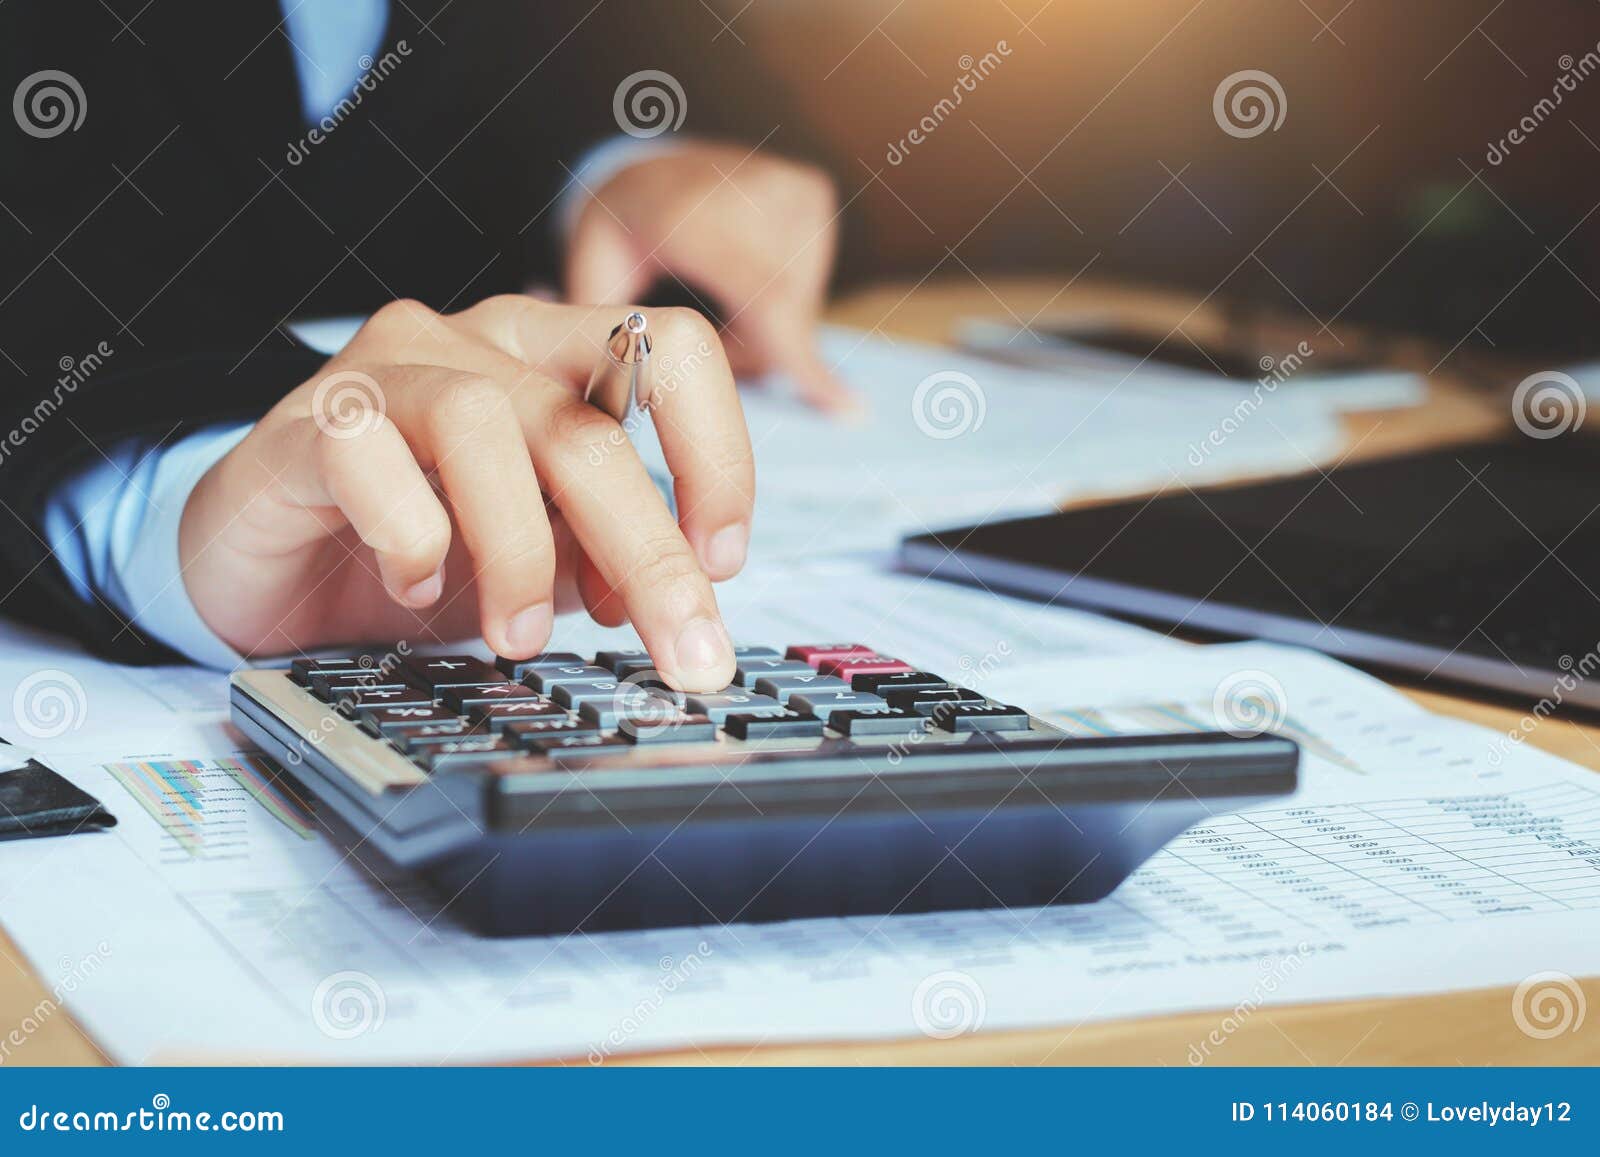 close up hand accountant using calculator with laptop. concept s